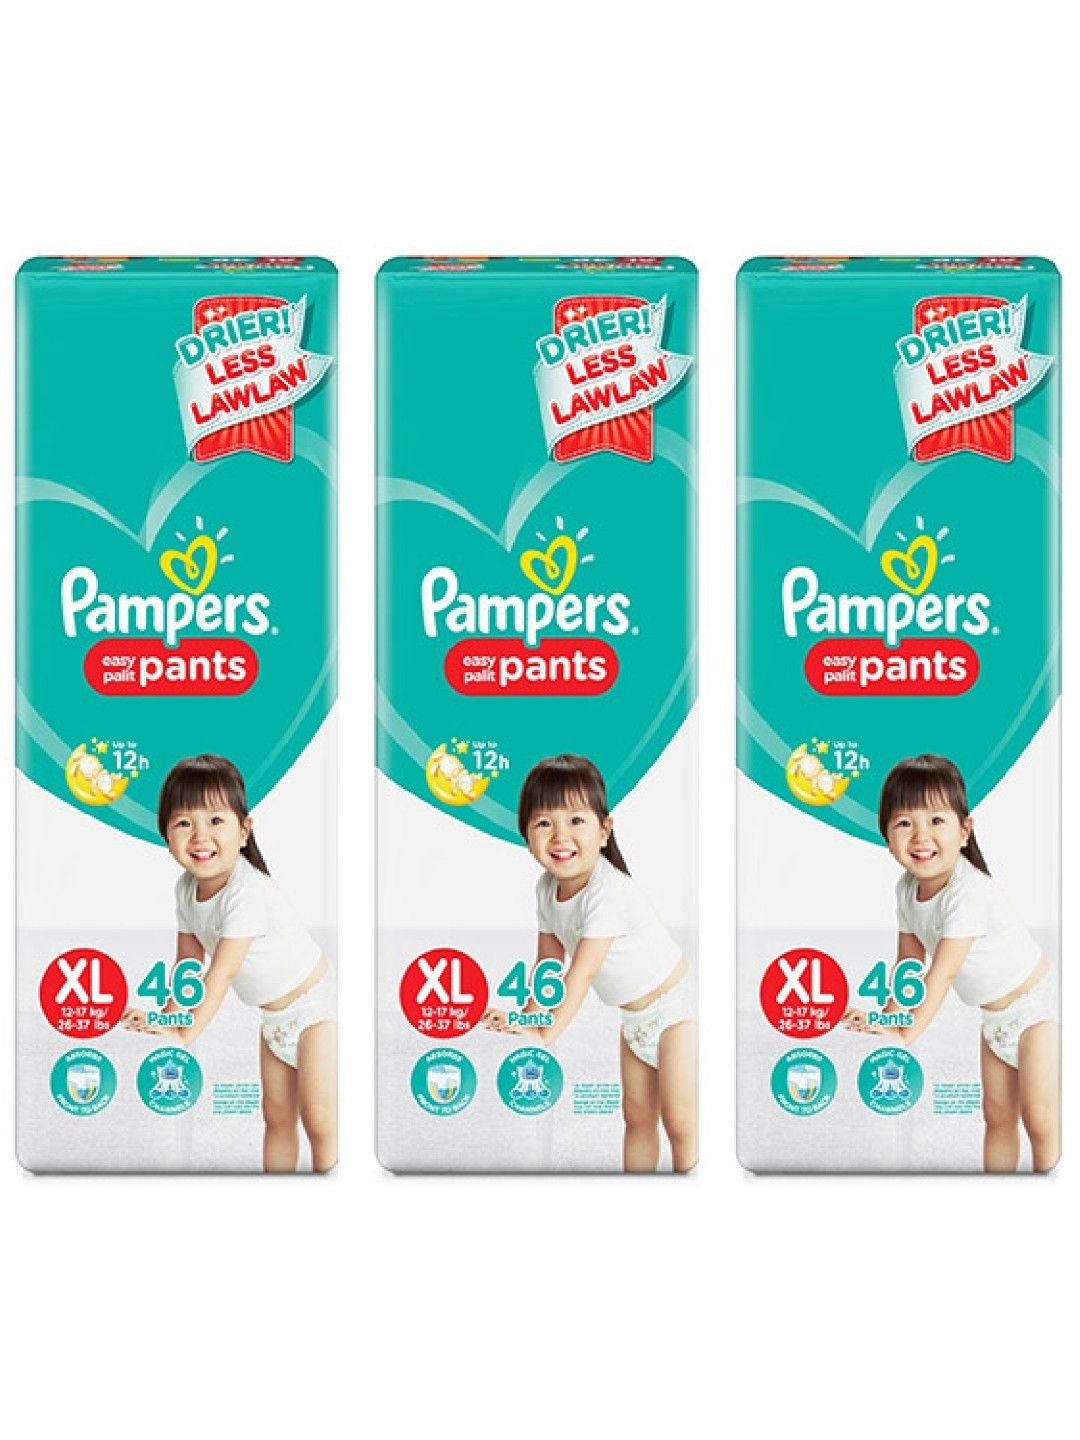 Pampers Baby Dry Pants XL 46s x 3 packs (138 pcs)